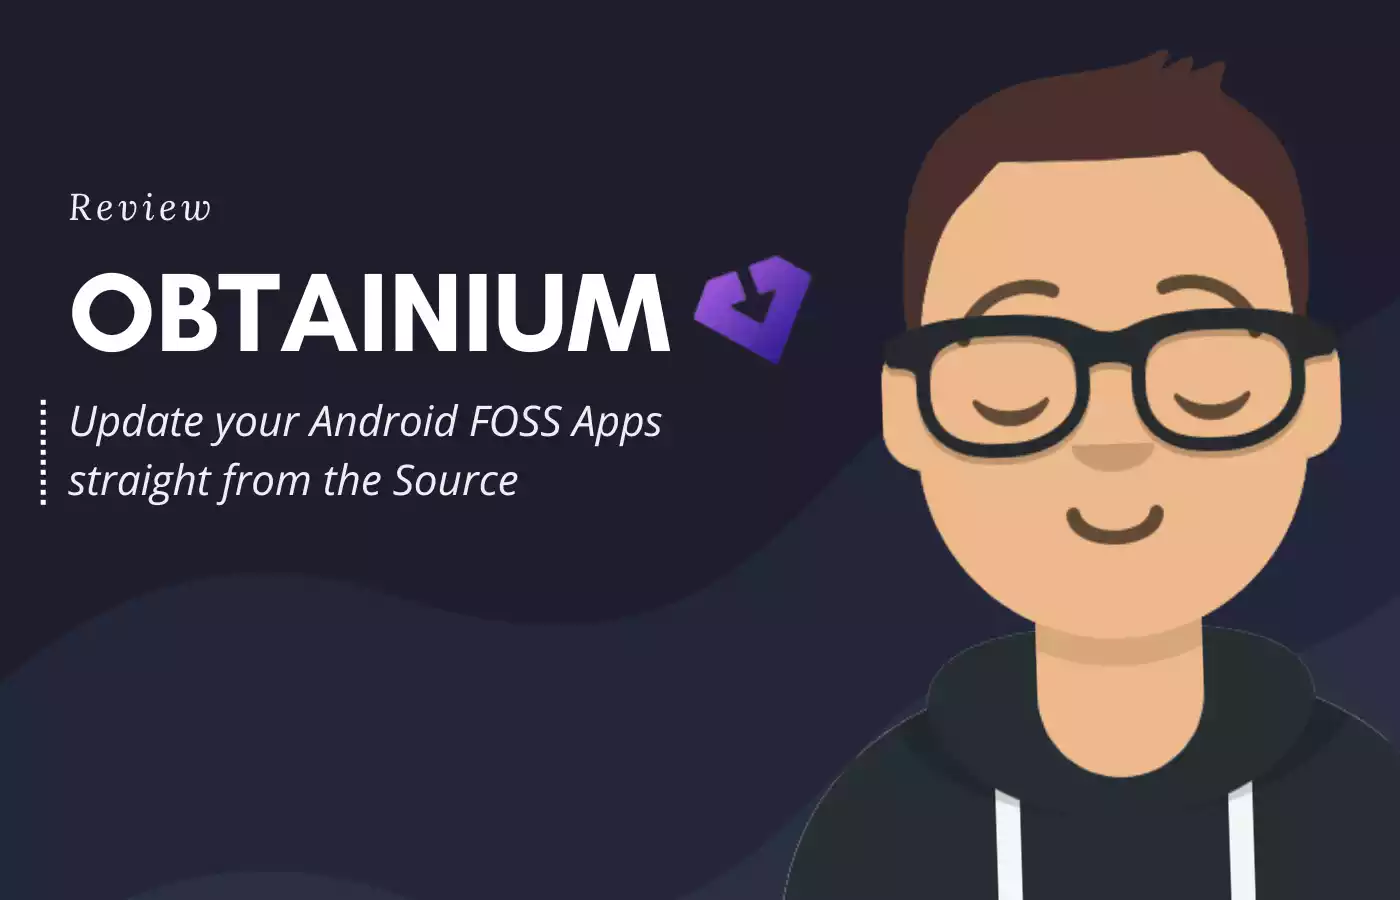 Review: Obtainium - Autoupdate your Android FOSS apps directly from github